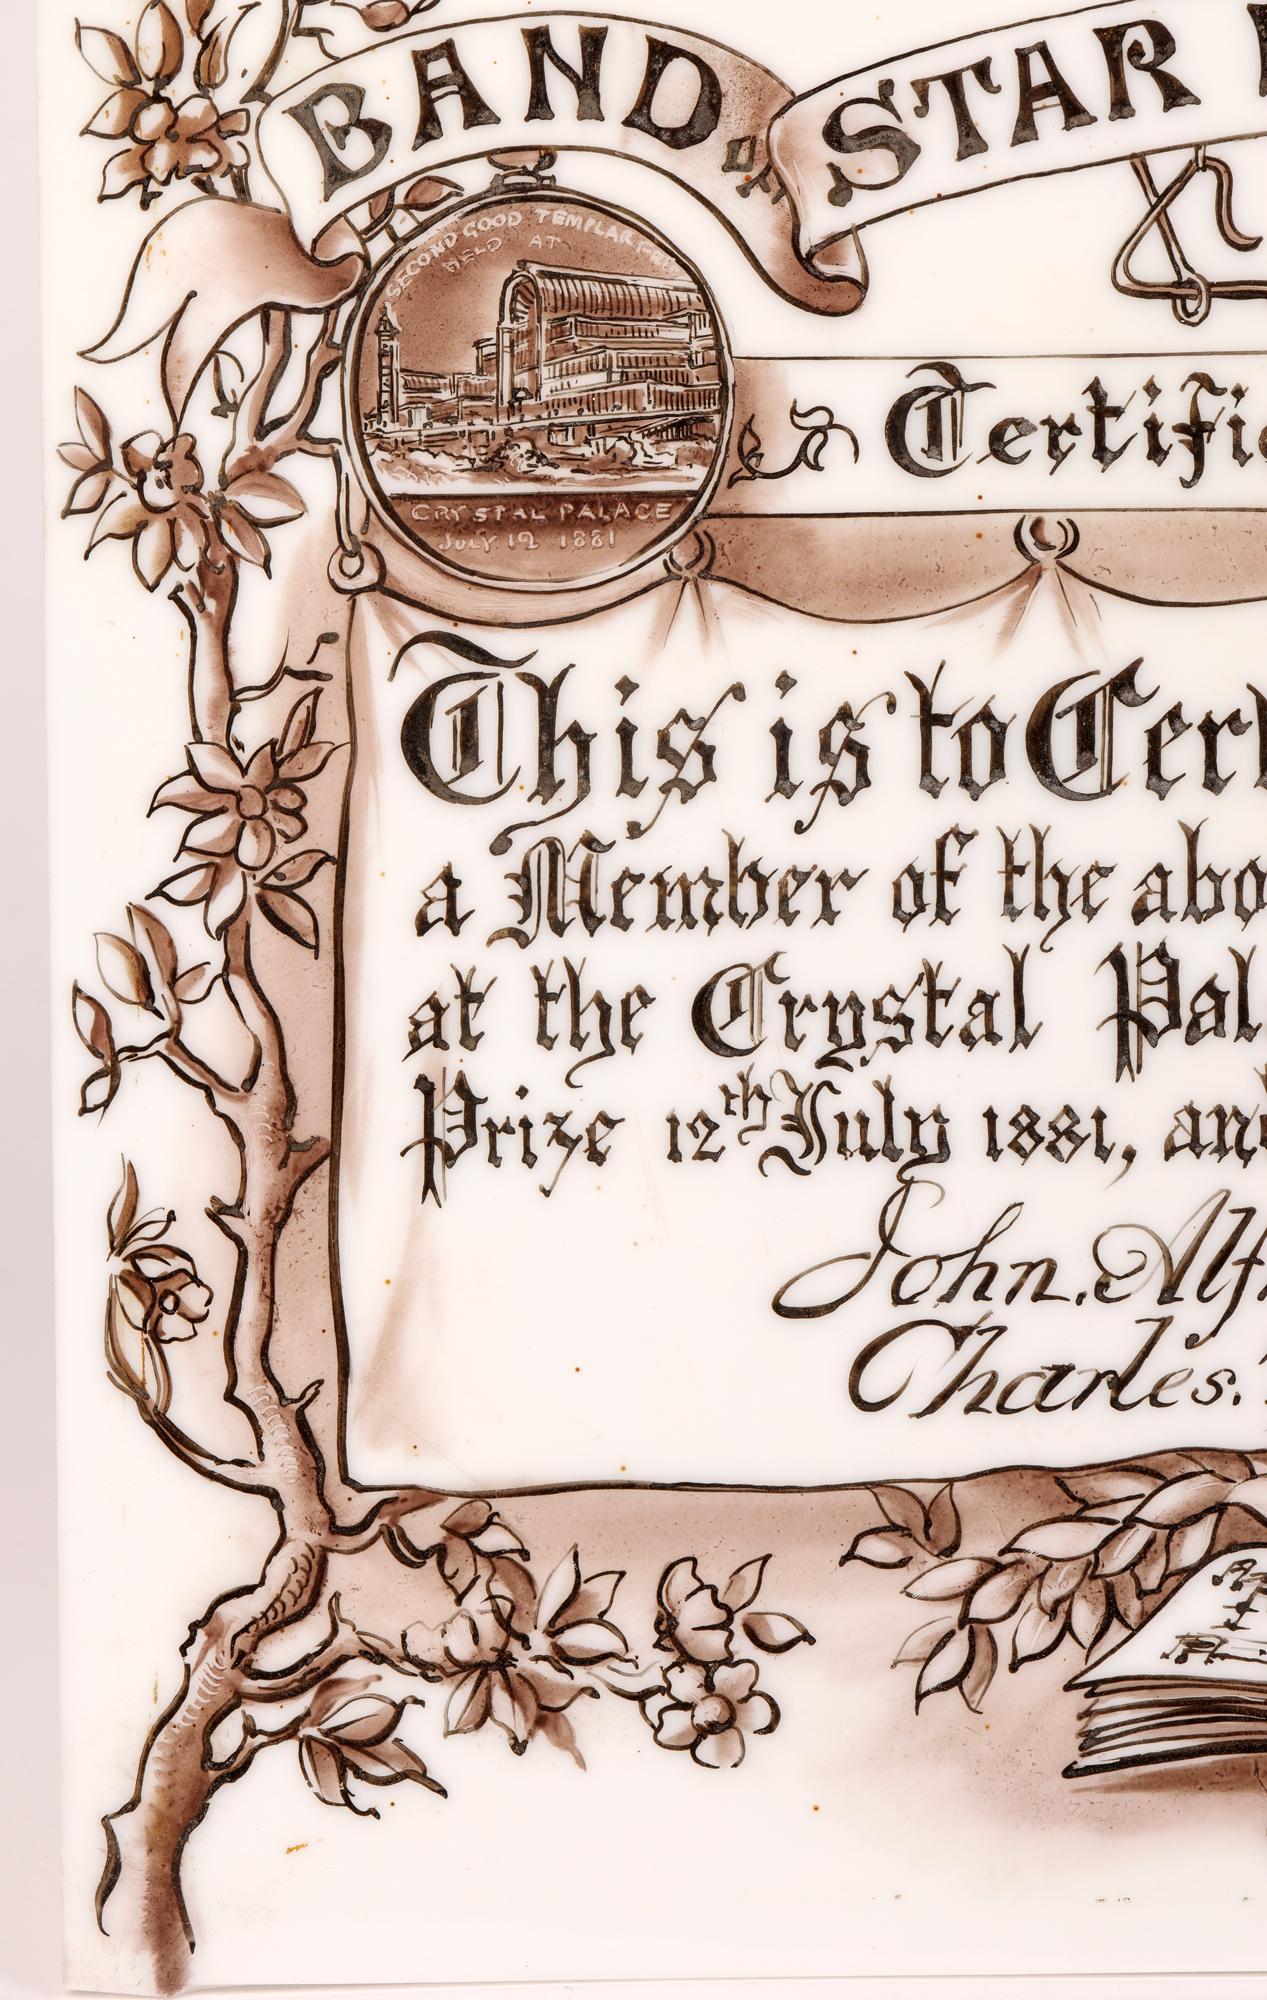 A very unusual, possibly unique, historical Certificate of Merit awarded at the drum and pipe band contest held at Crystal Palace between 1880 and 1883 and awarded in 1883. The certificate is hand-painted on a rectangular sheet of milk glass and is